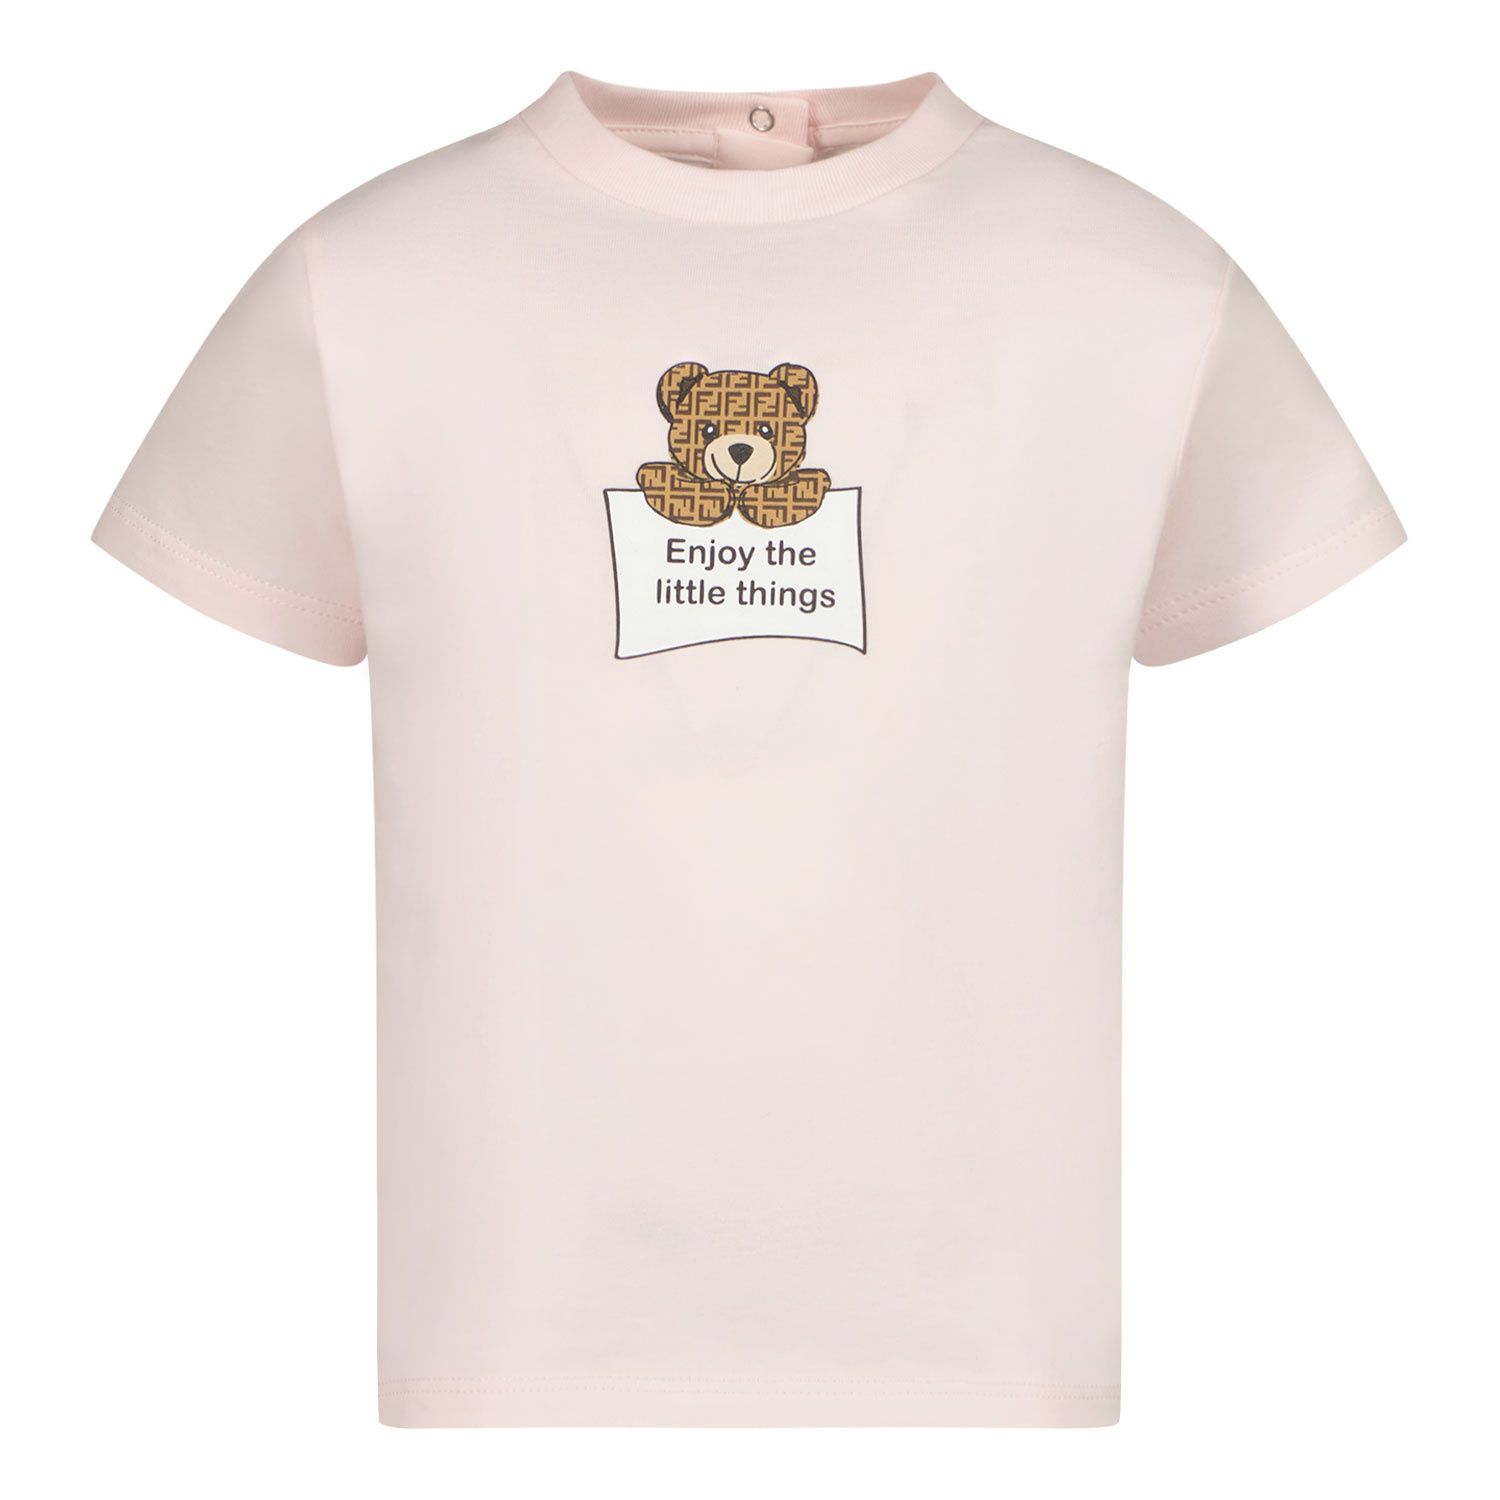 Picture of Fendi BUI036 ST8 baby shirt light pink